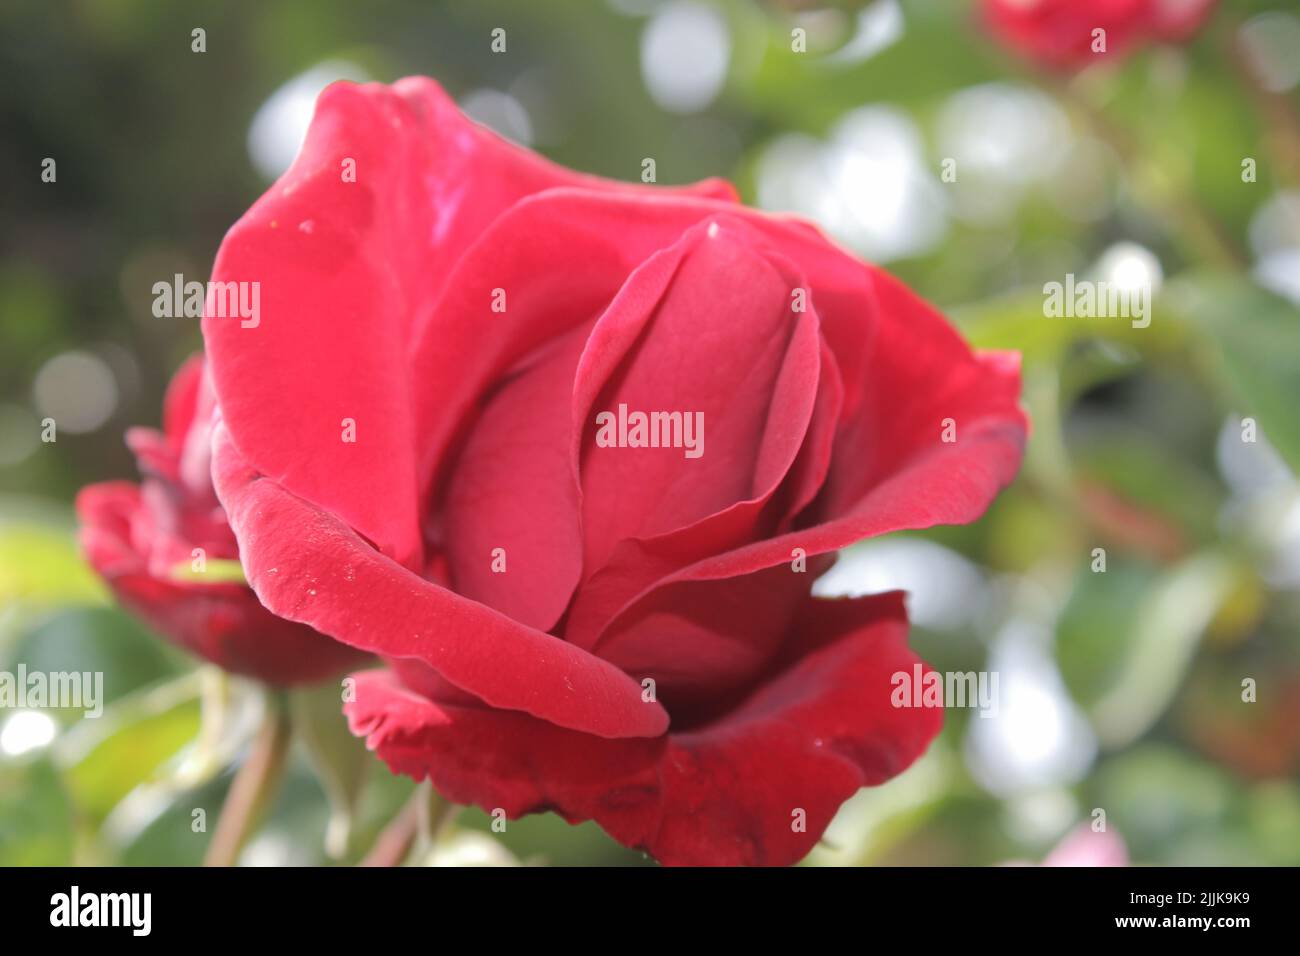 Summer blossoms in close-up. Red Roses in the garden. Red flower petals. Green Background. Lush Foliage. Bushy tree. Symbolic of flowers. Love. Stock Photo